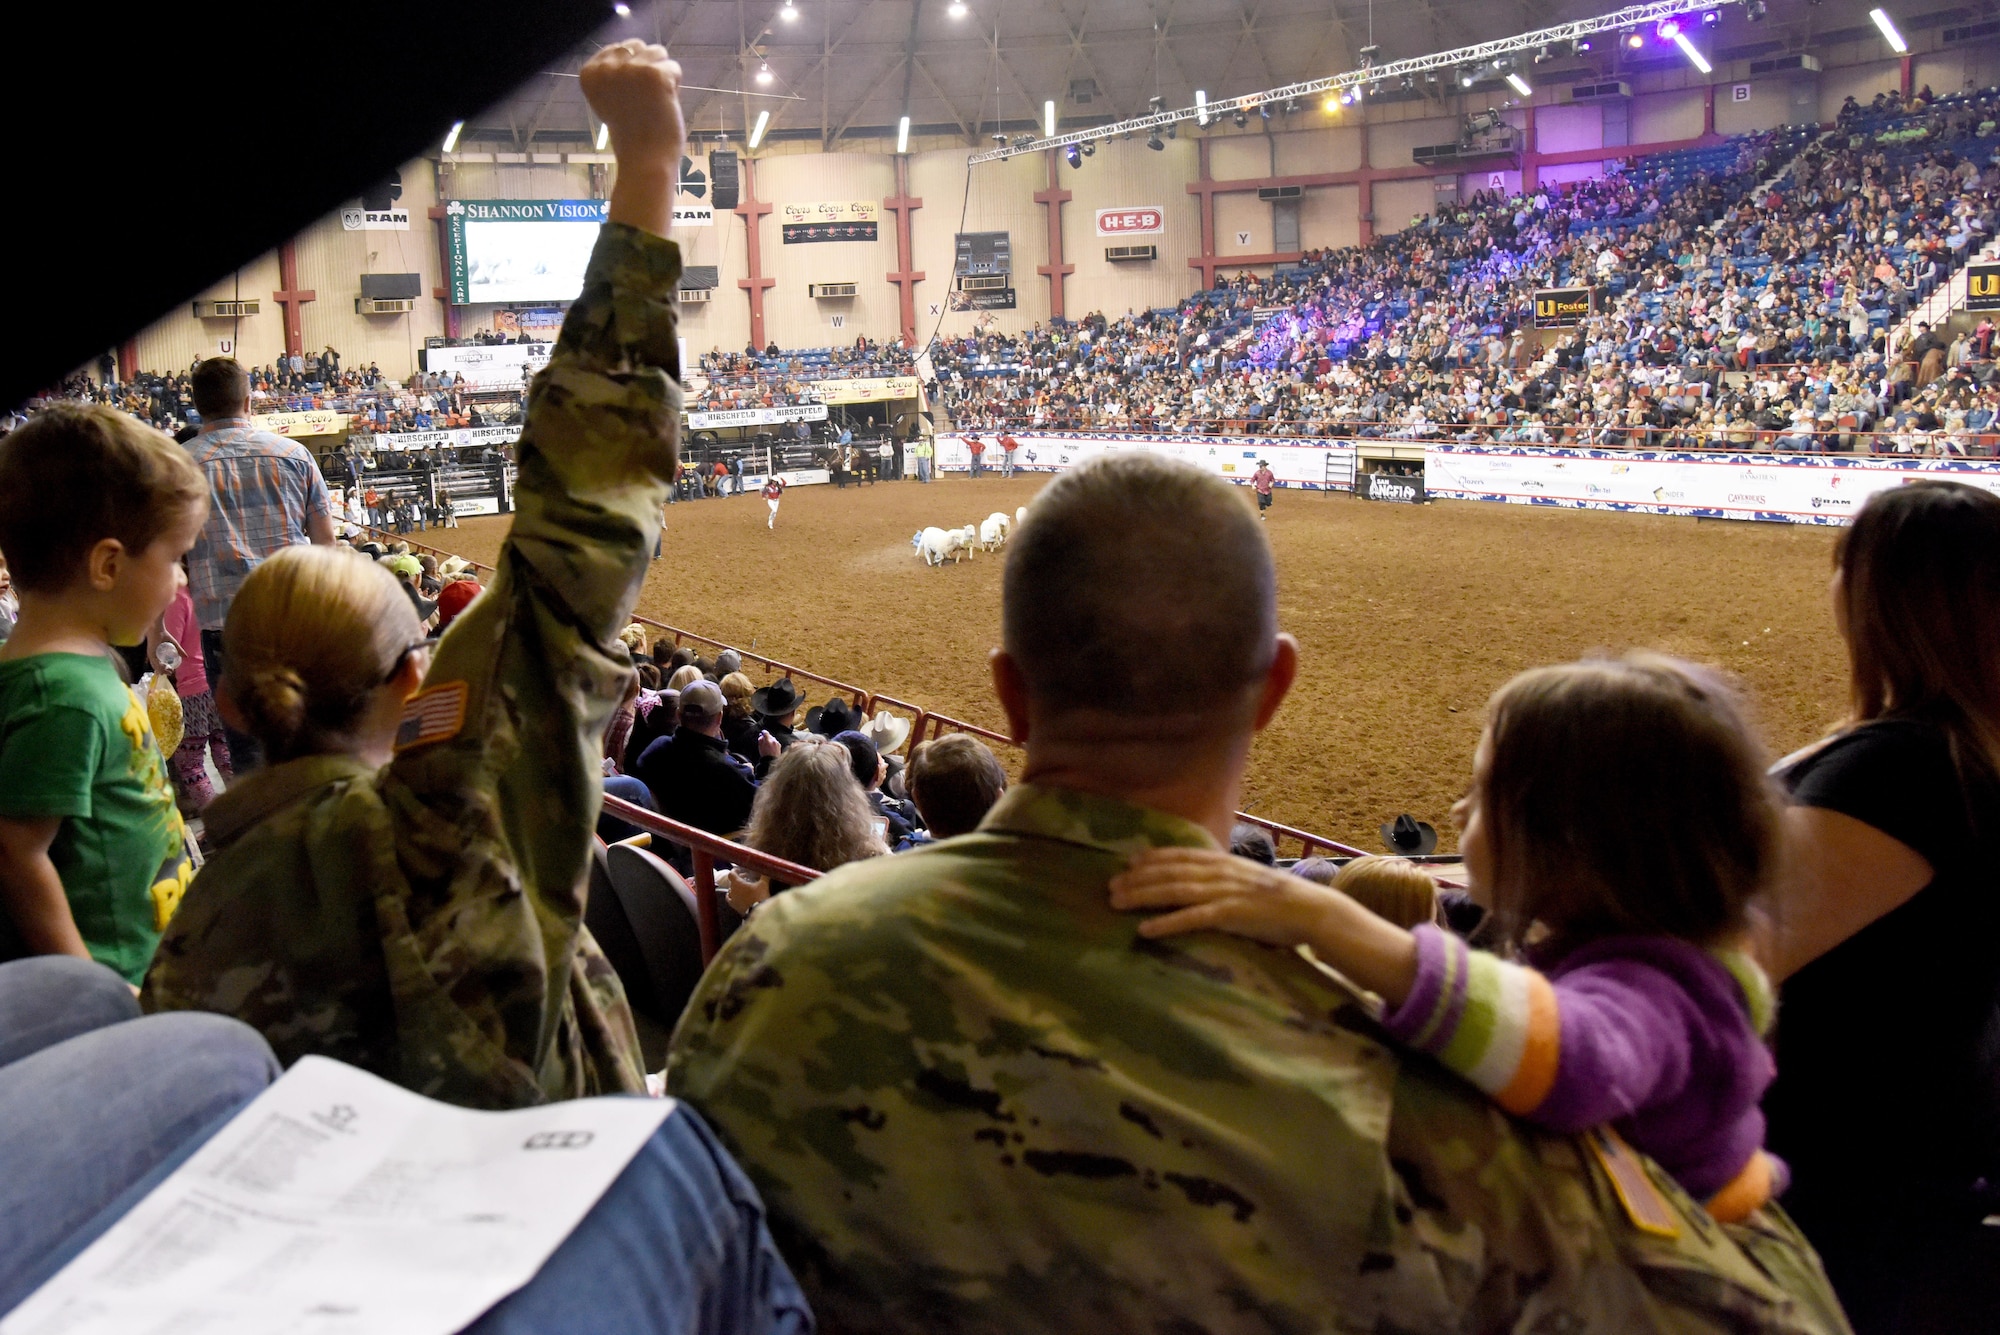 Soldiers watch the mutton busting during the 85th Annual San Angelo Stock Show and Rodeo Military Appreciation Night at the Foster Communications Coliseum in San Angelo, Texas, Feb. 15, 2017. Mutton busting is a rodeo event where children ride bucking sheep. (U.S. Air Force photo by Staff Sgt. Joshua Edwards/Released)